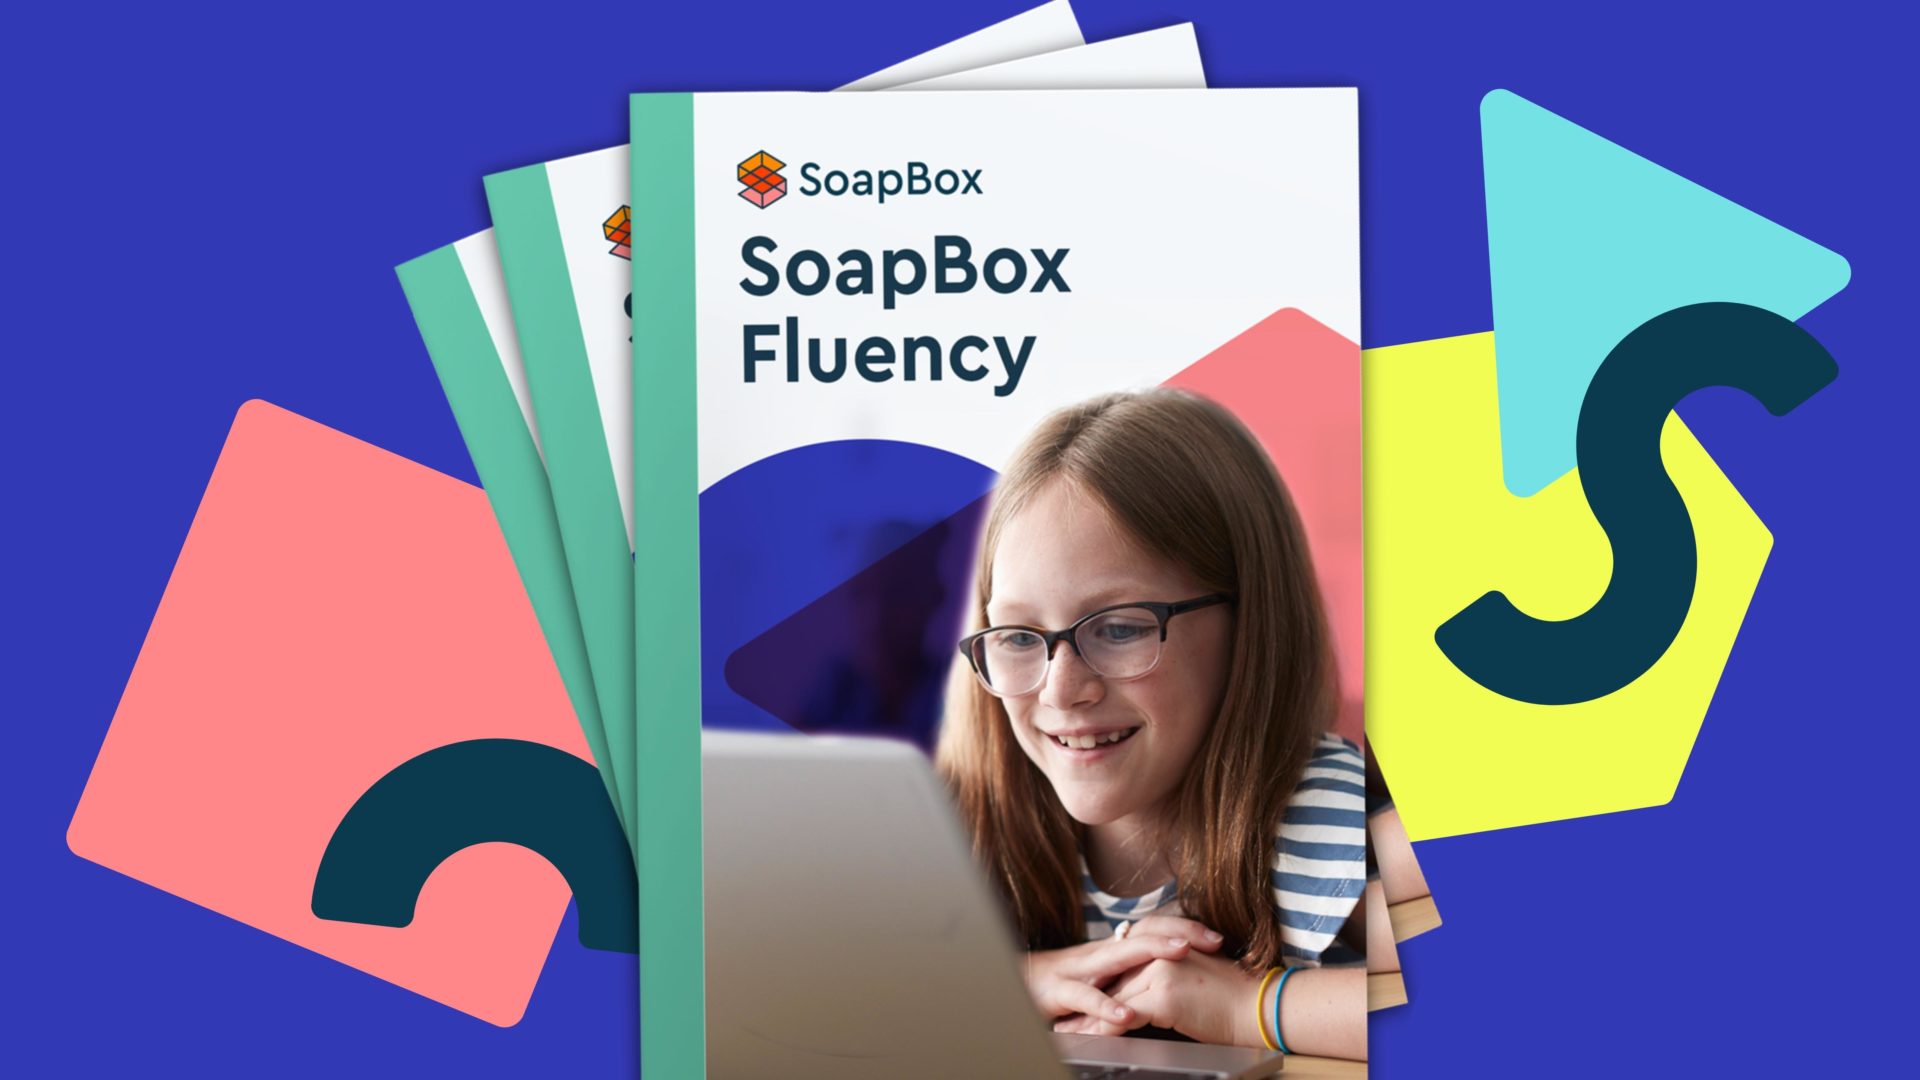 An image with text that says "SoapBox fluency."